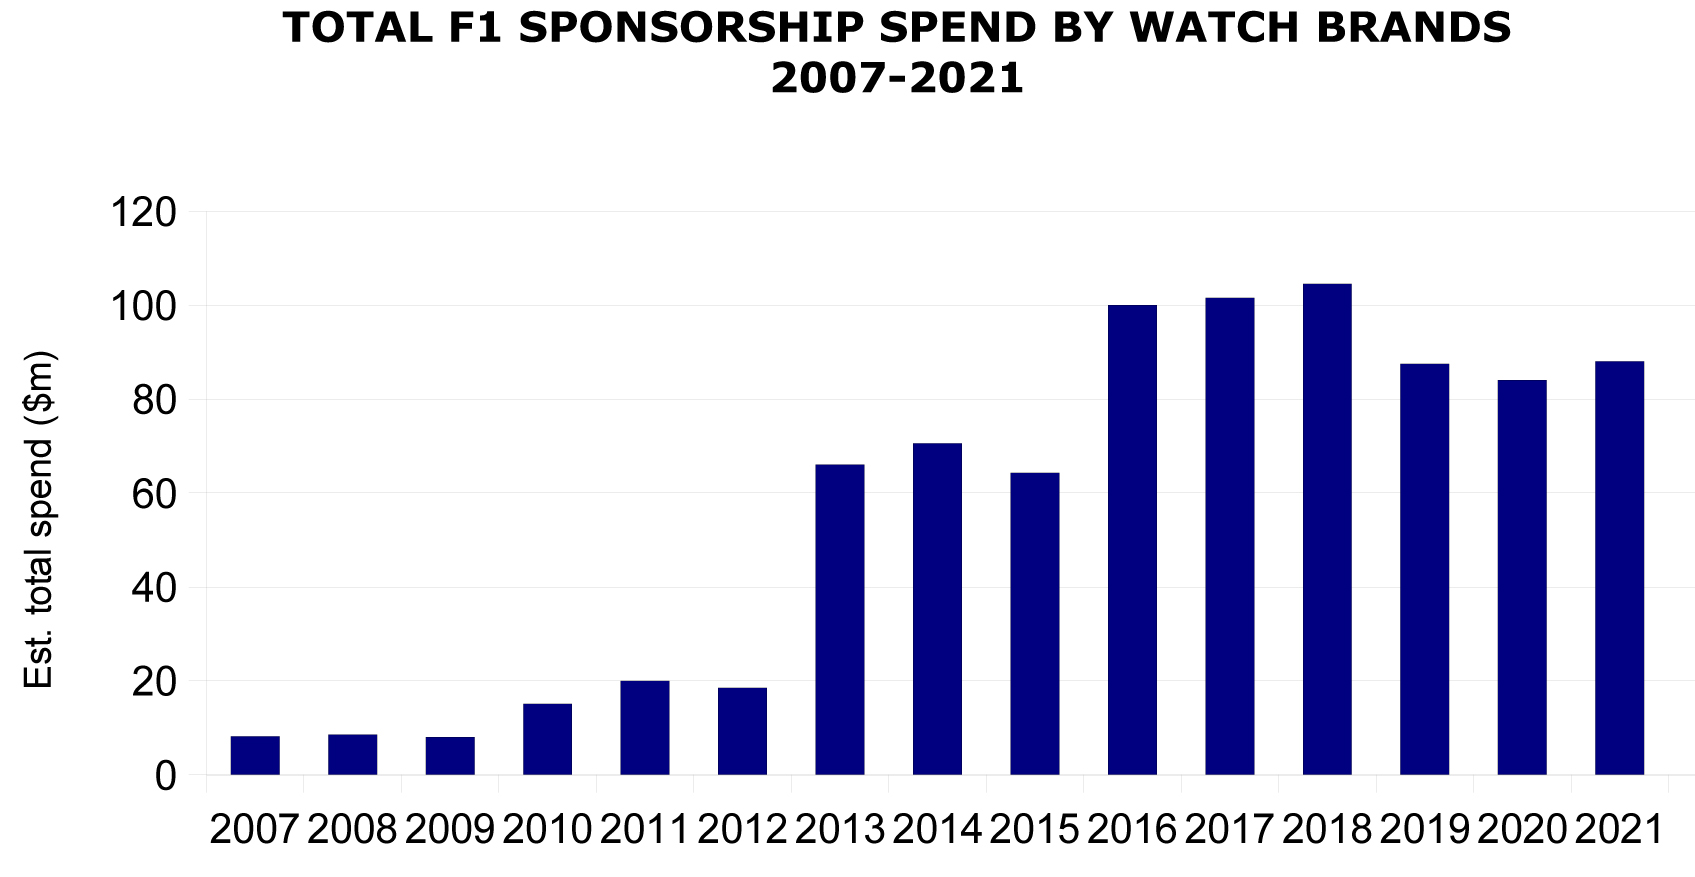 Total spend by watch brands in formula 1